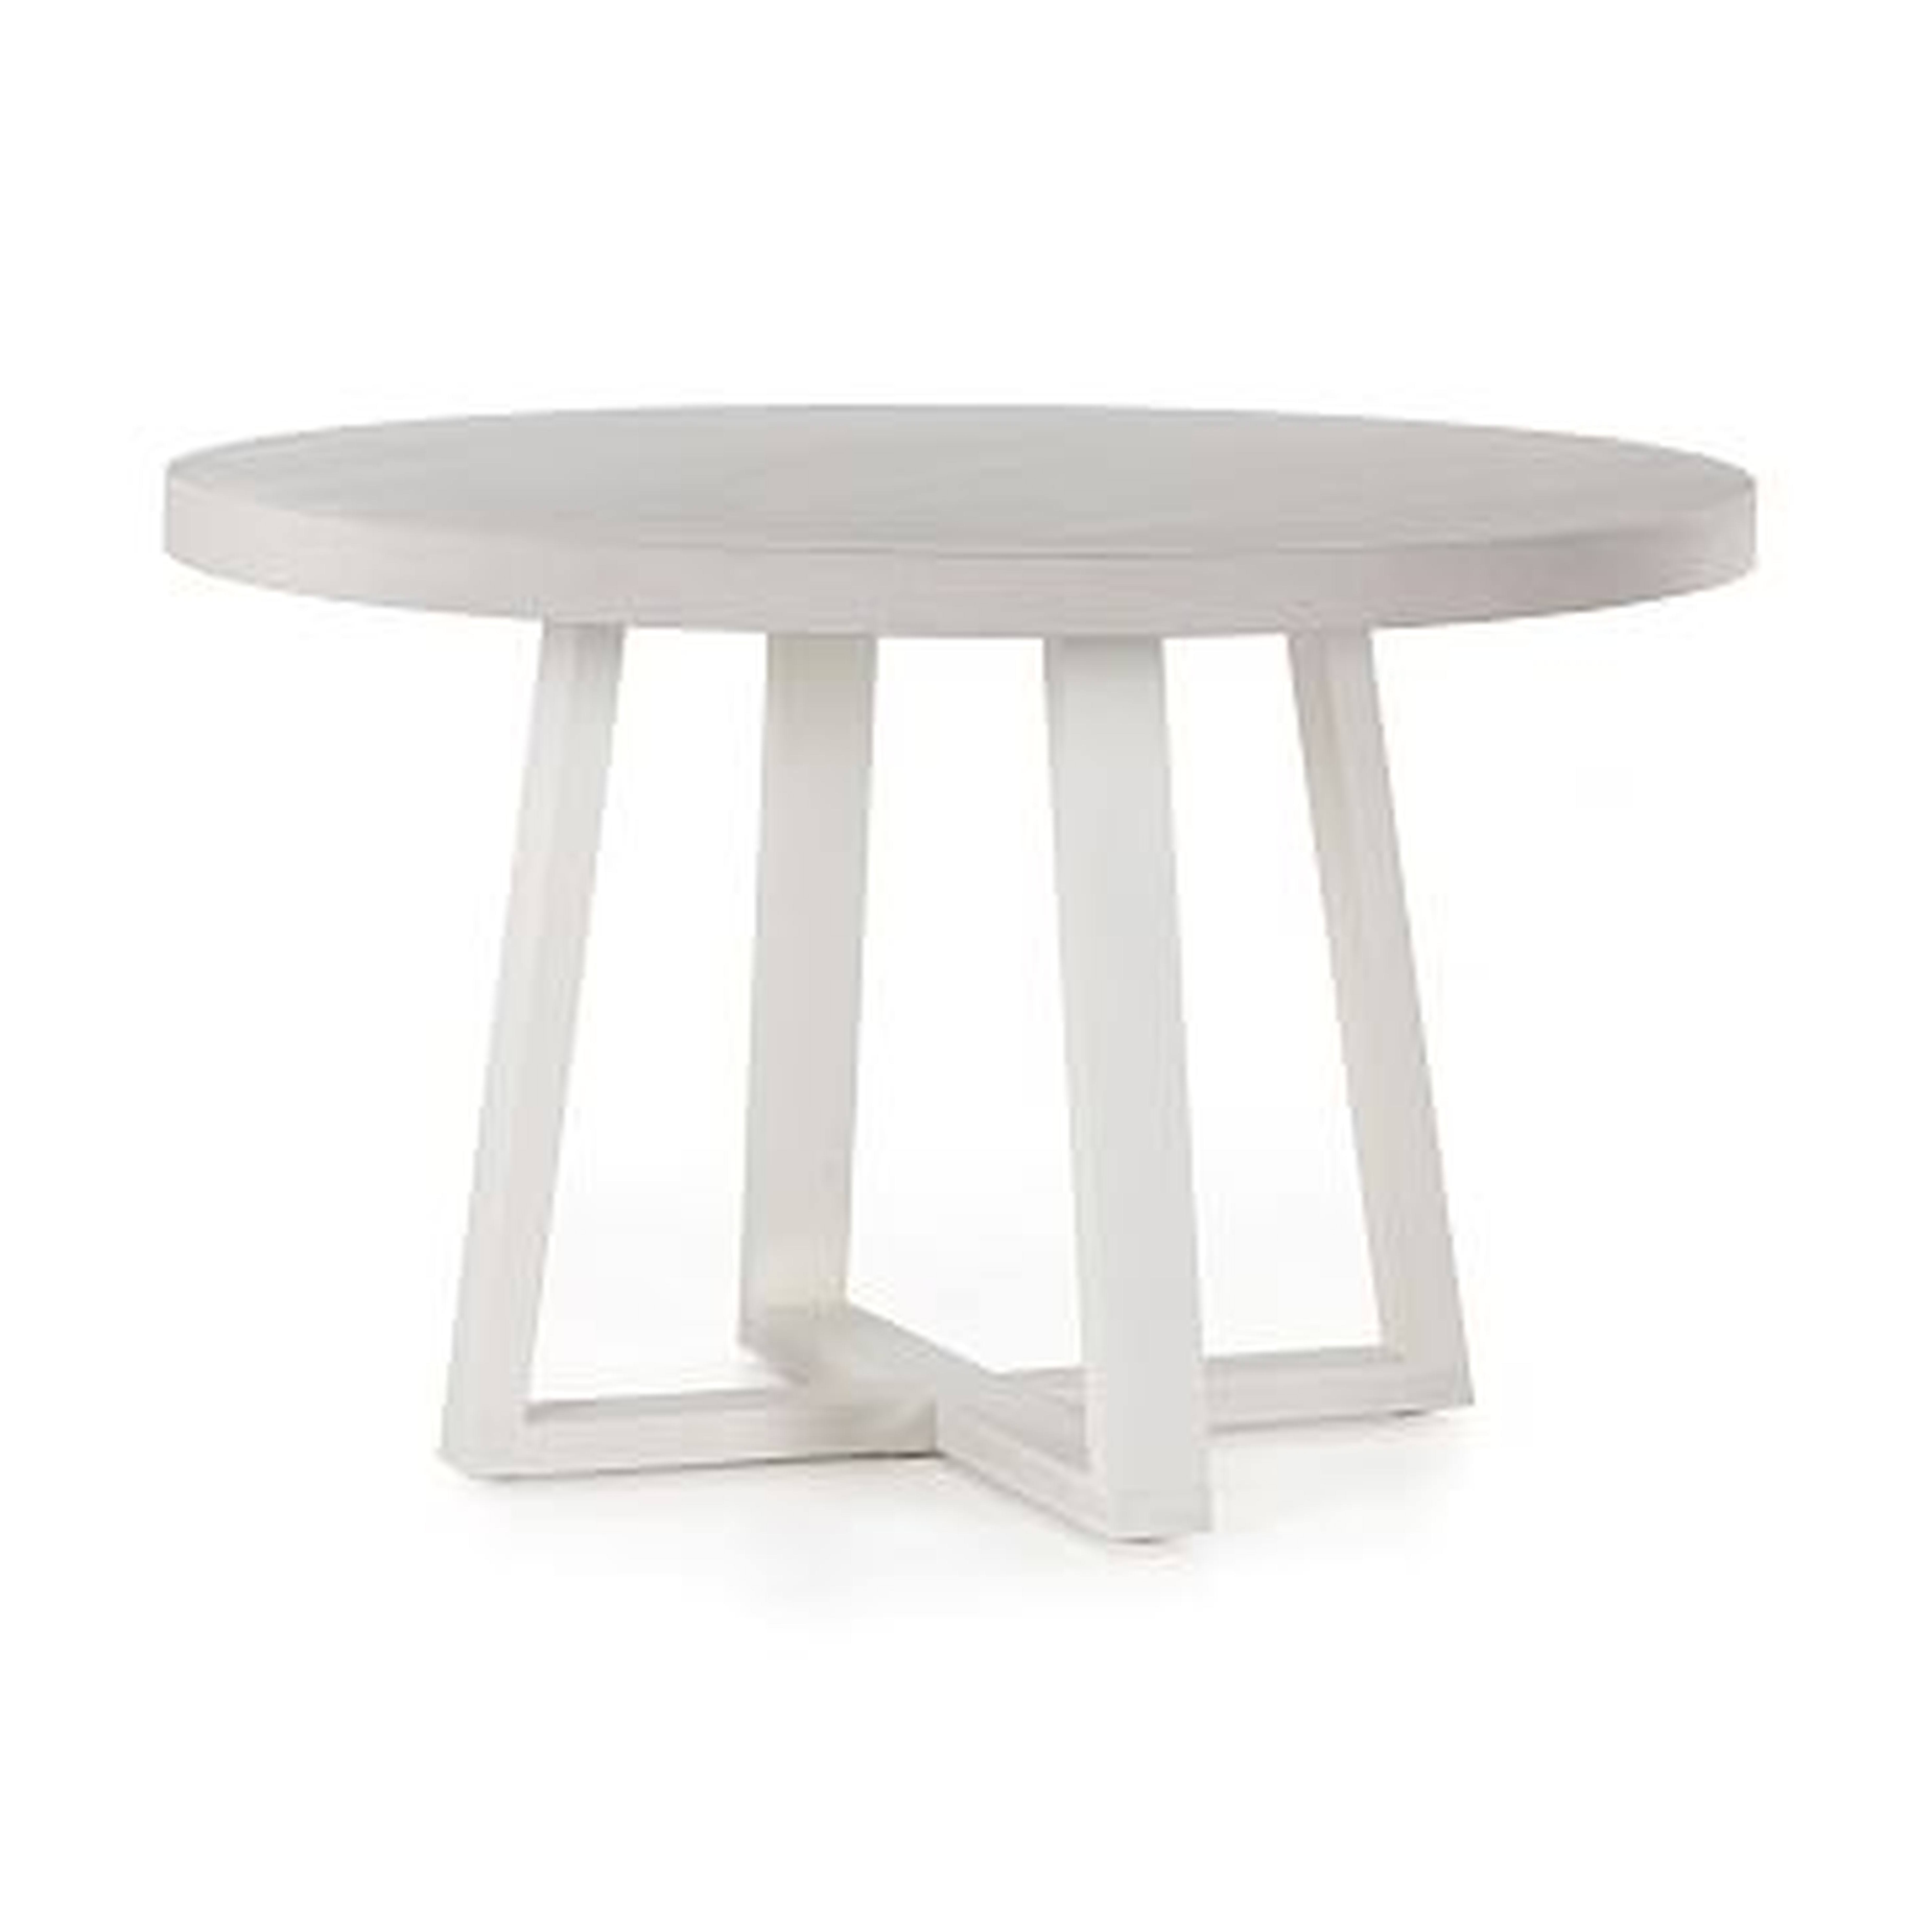 Malfa 47.25" Outdoor Round Dining Table, Natural Sand - West Elm